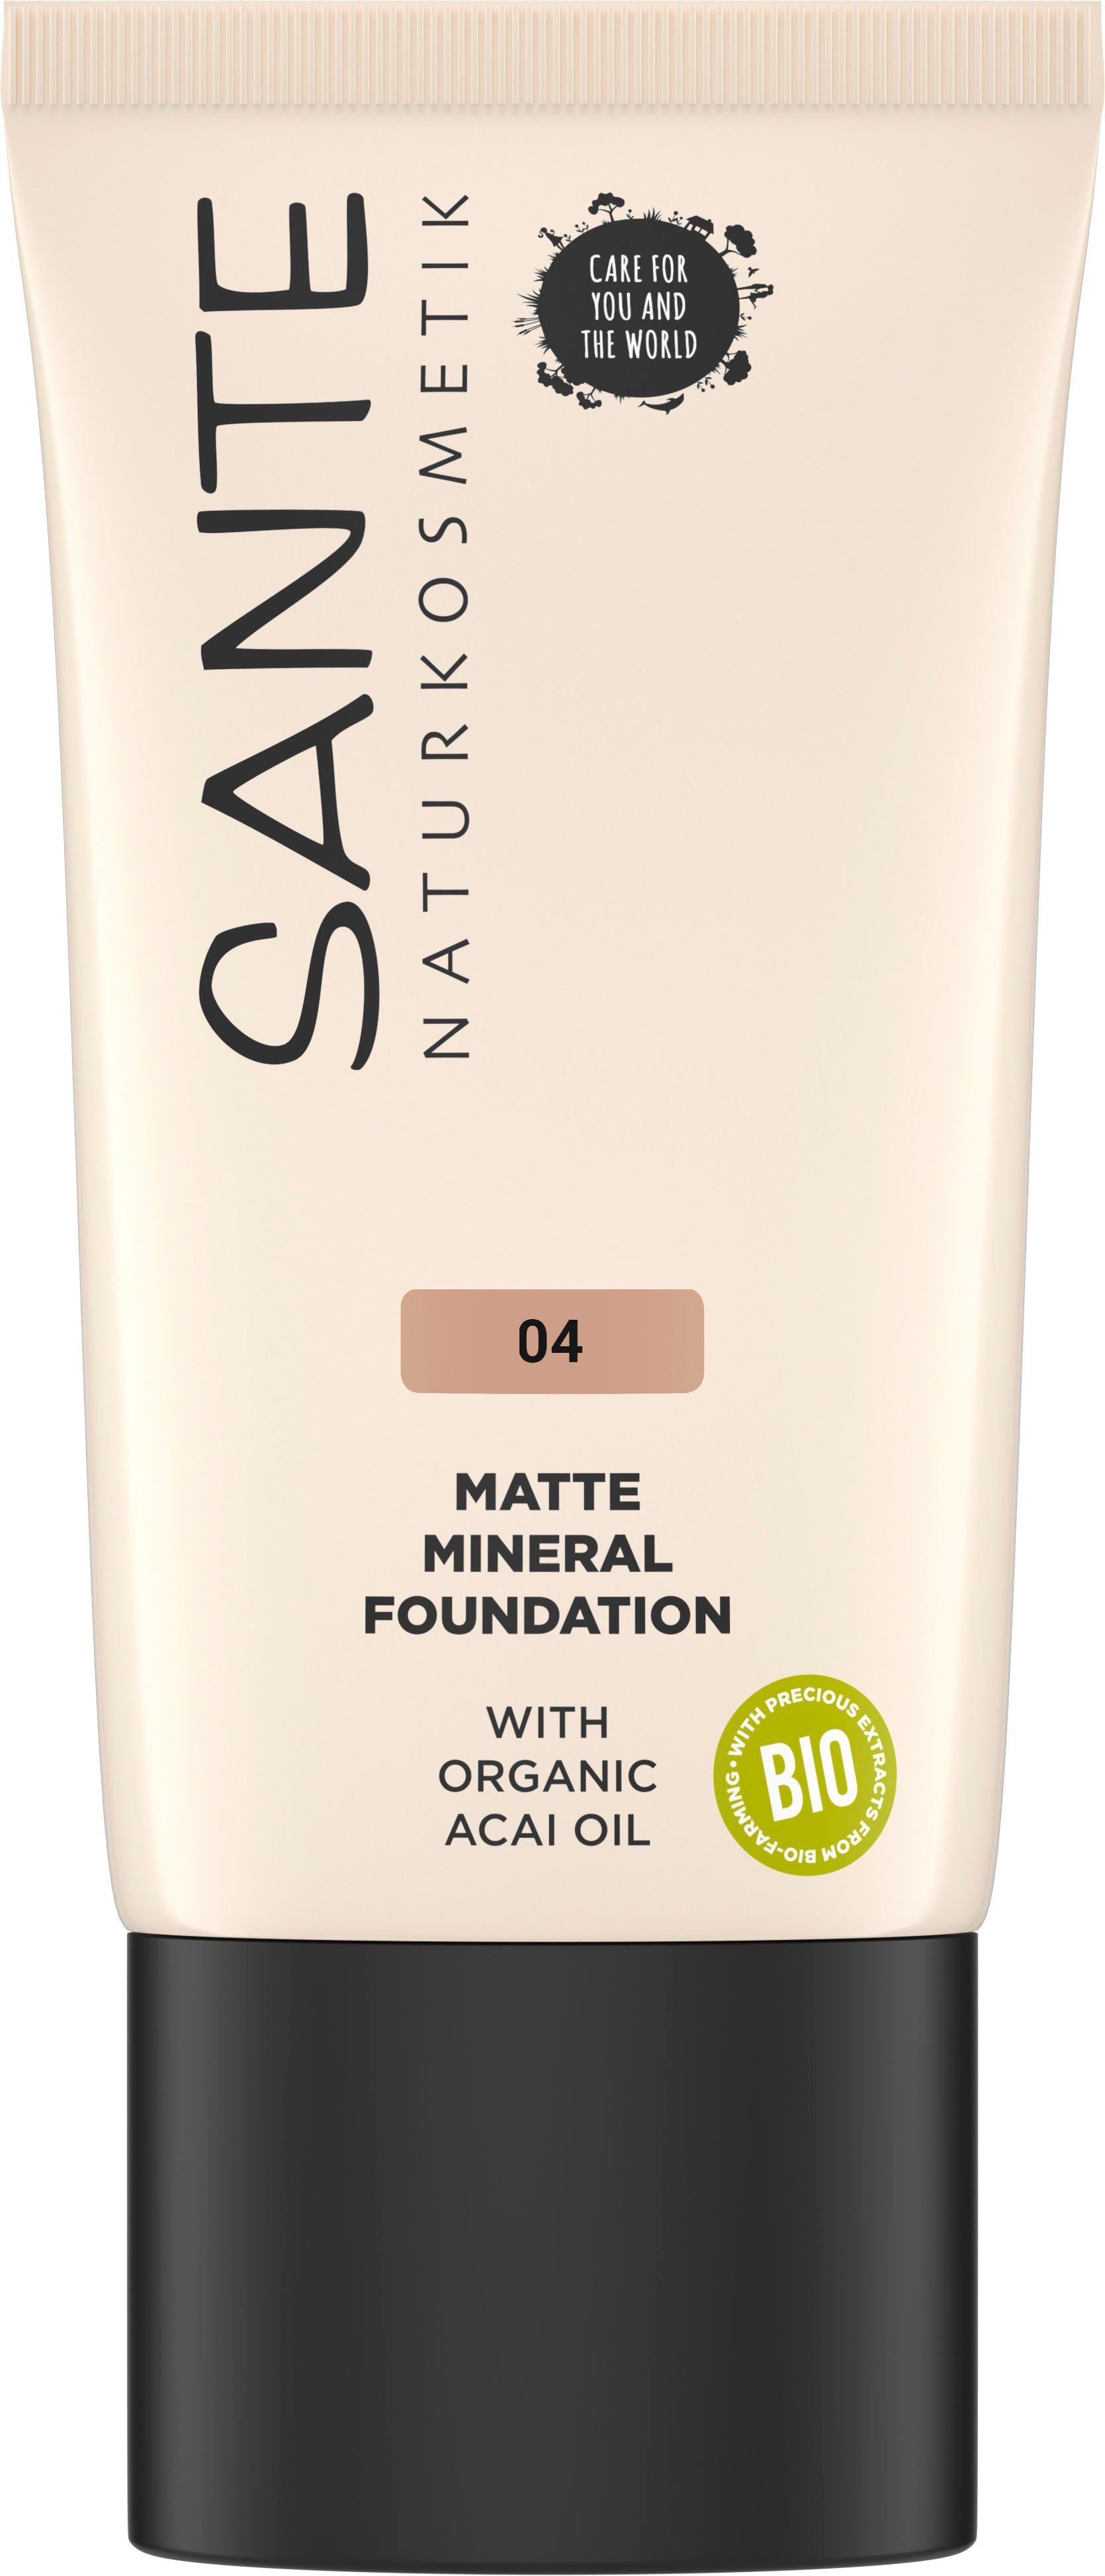 SANTE Foundation Matte Mineral Foundation 04 Cool Fawn | Foundation